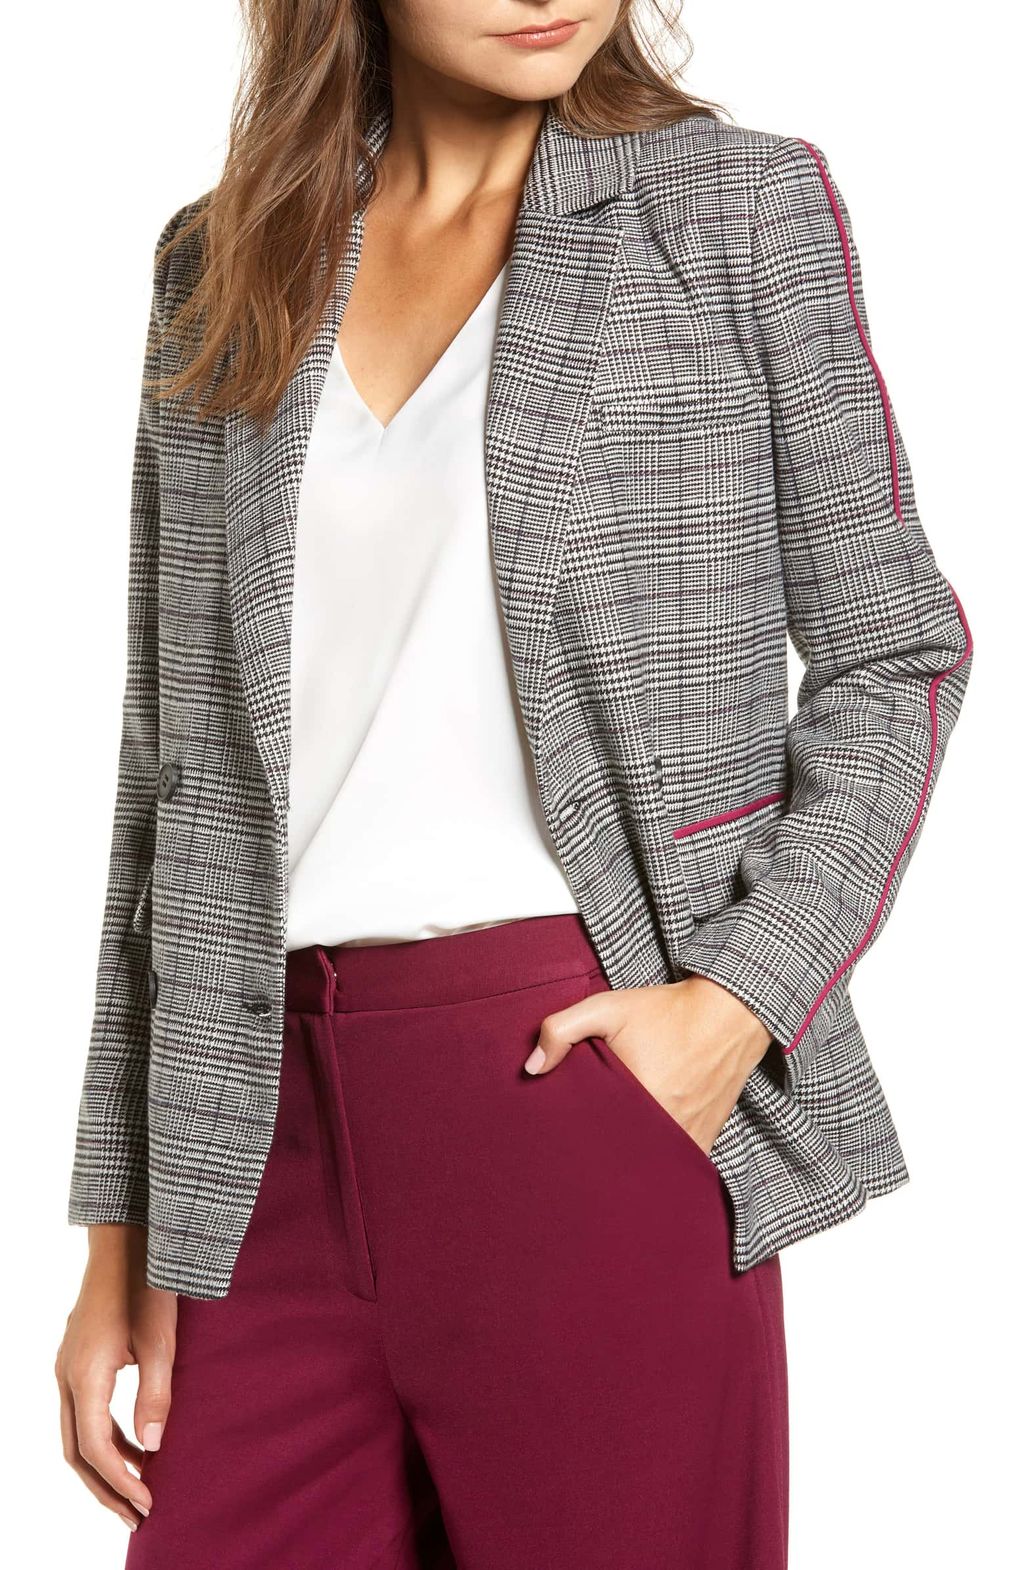 The Best Office Outfits, According to Successful Women | Who What Wear